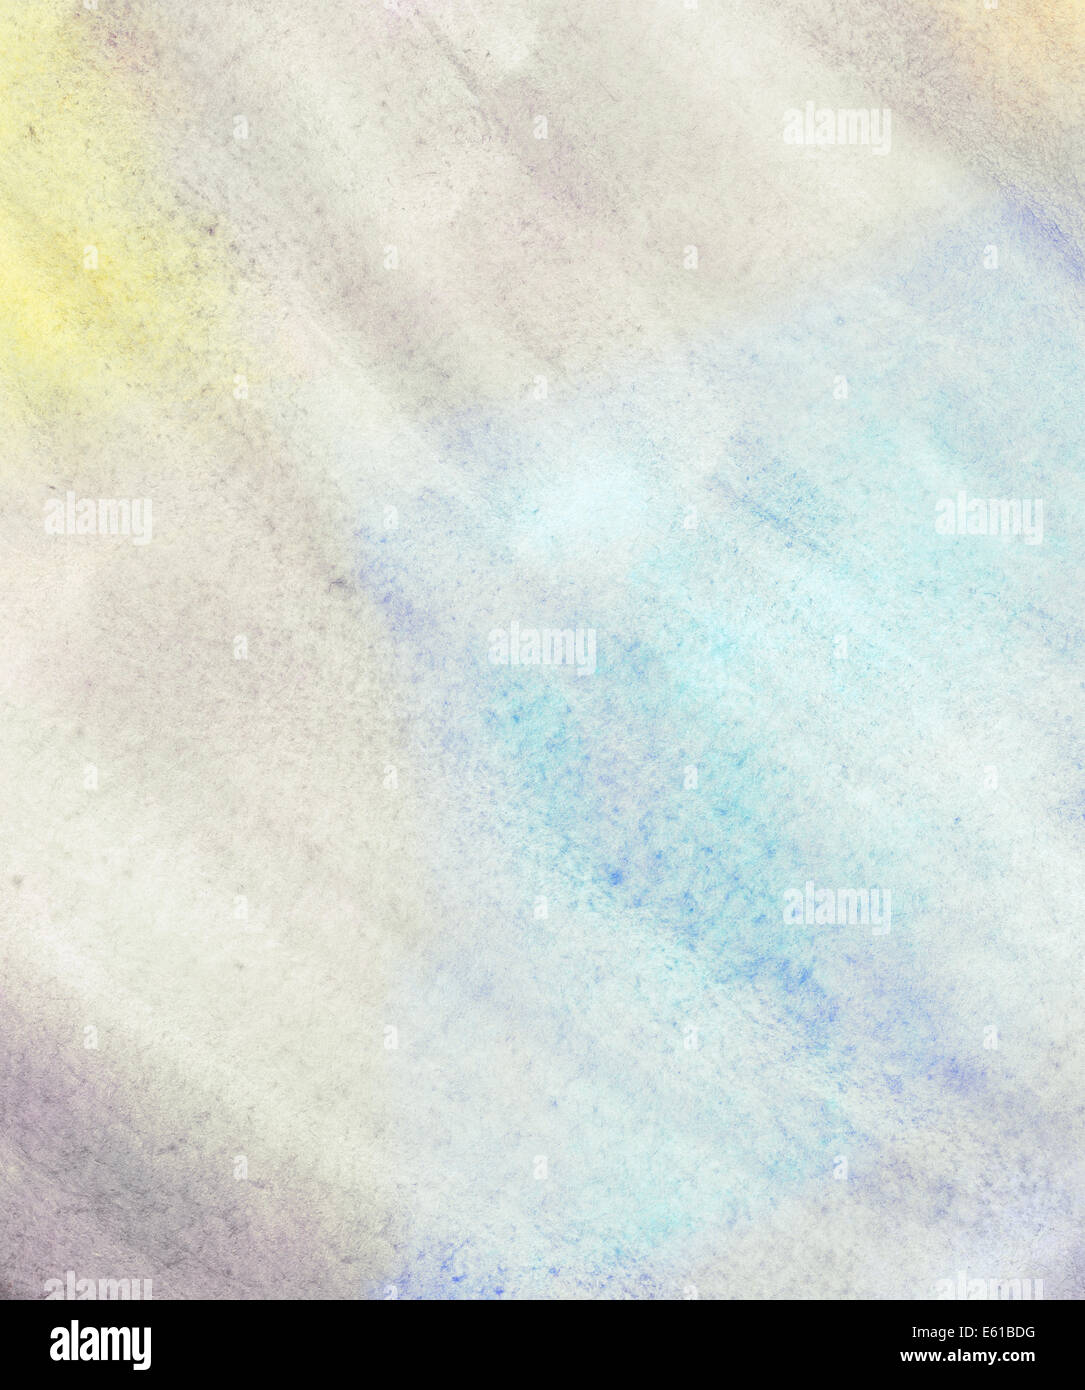 Abstract grunge watercolor background. Stock Photo